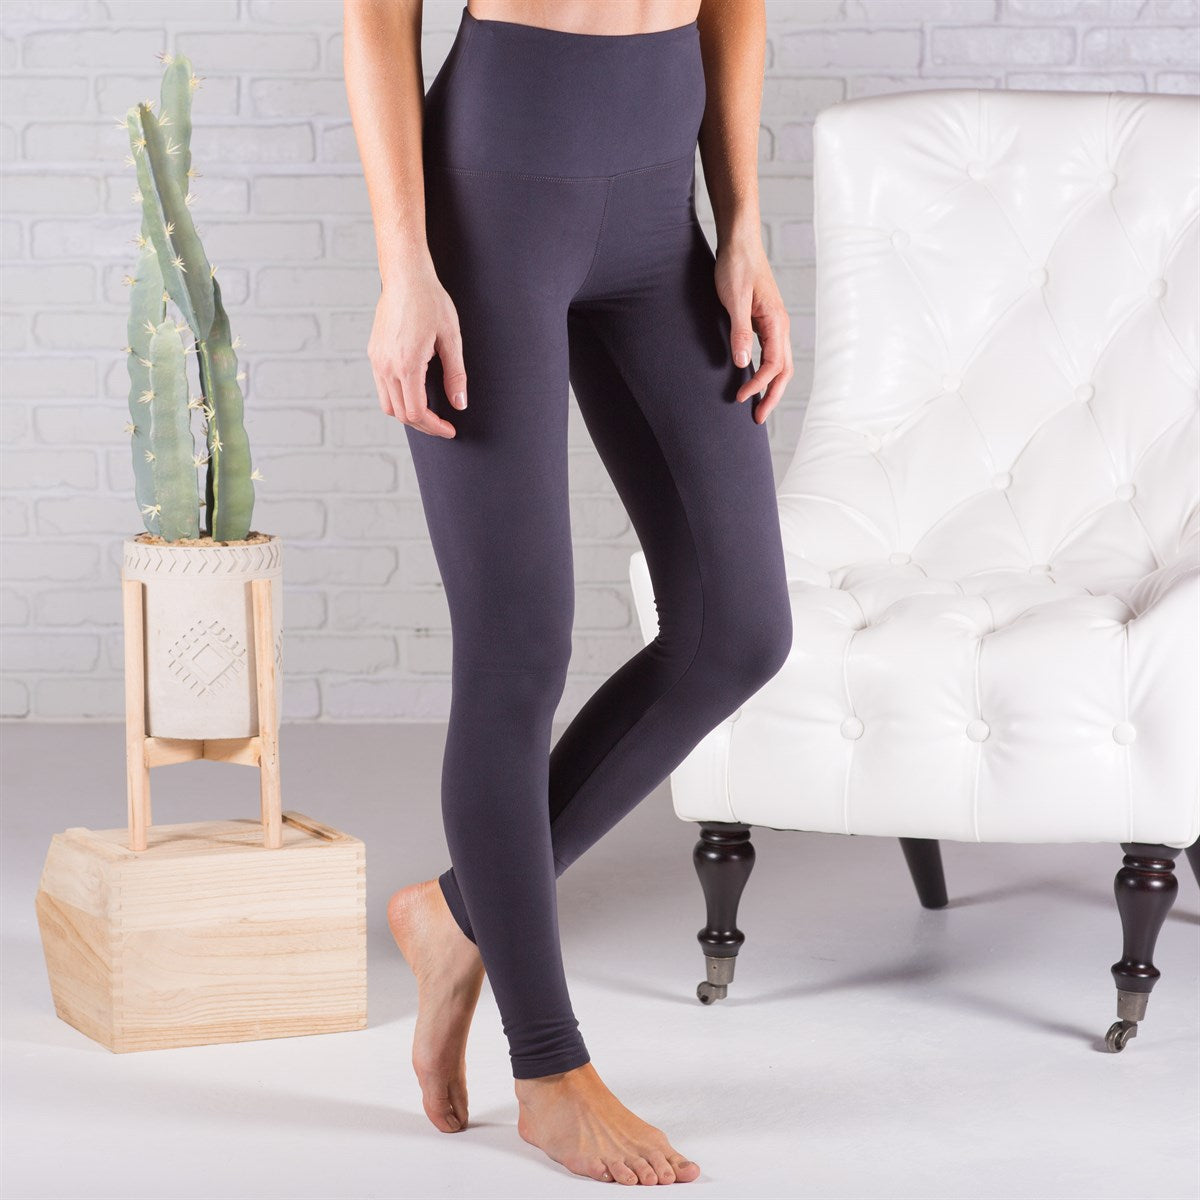 FLEO IS BACK!! 💫Get ready for the Super High Legging, the buttery